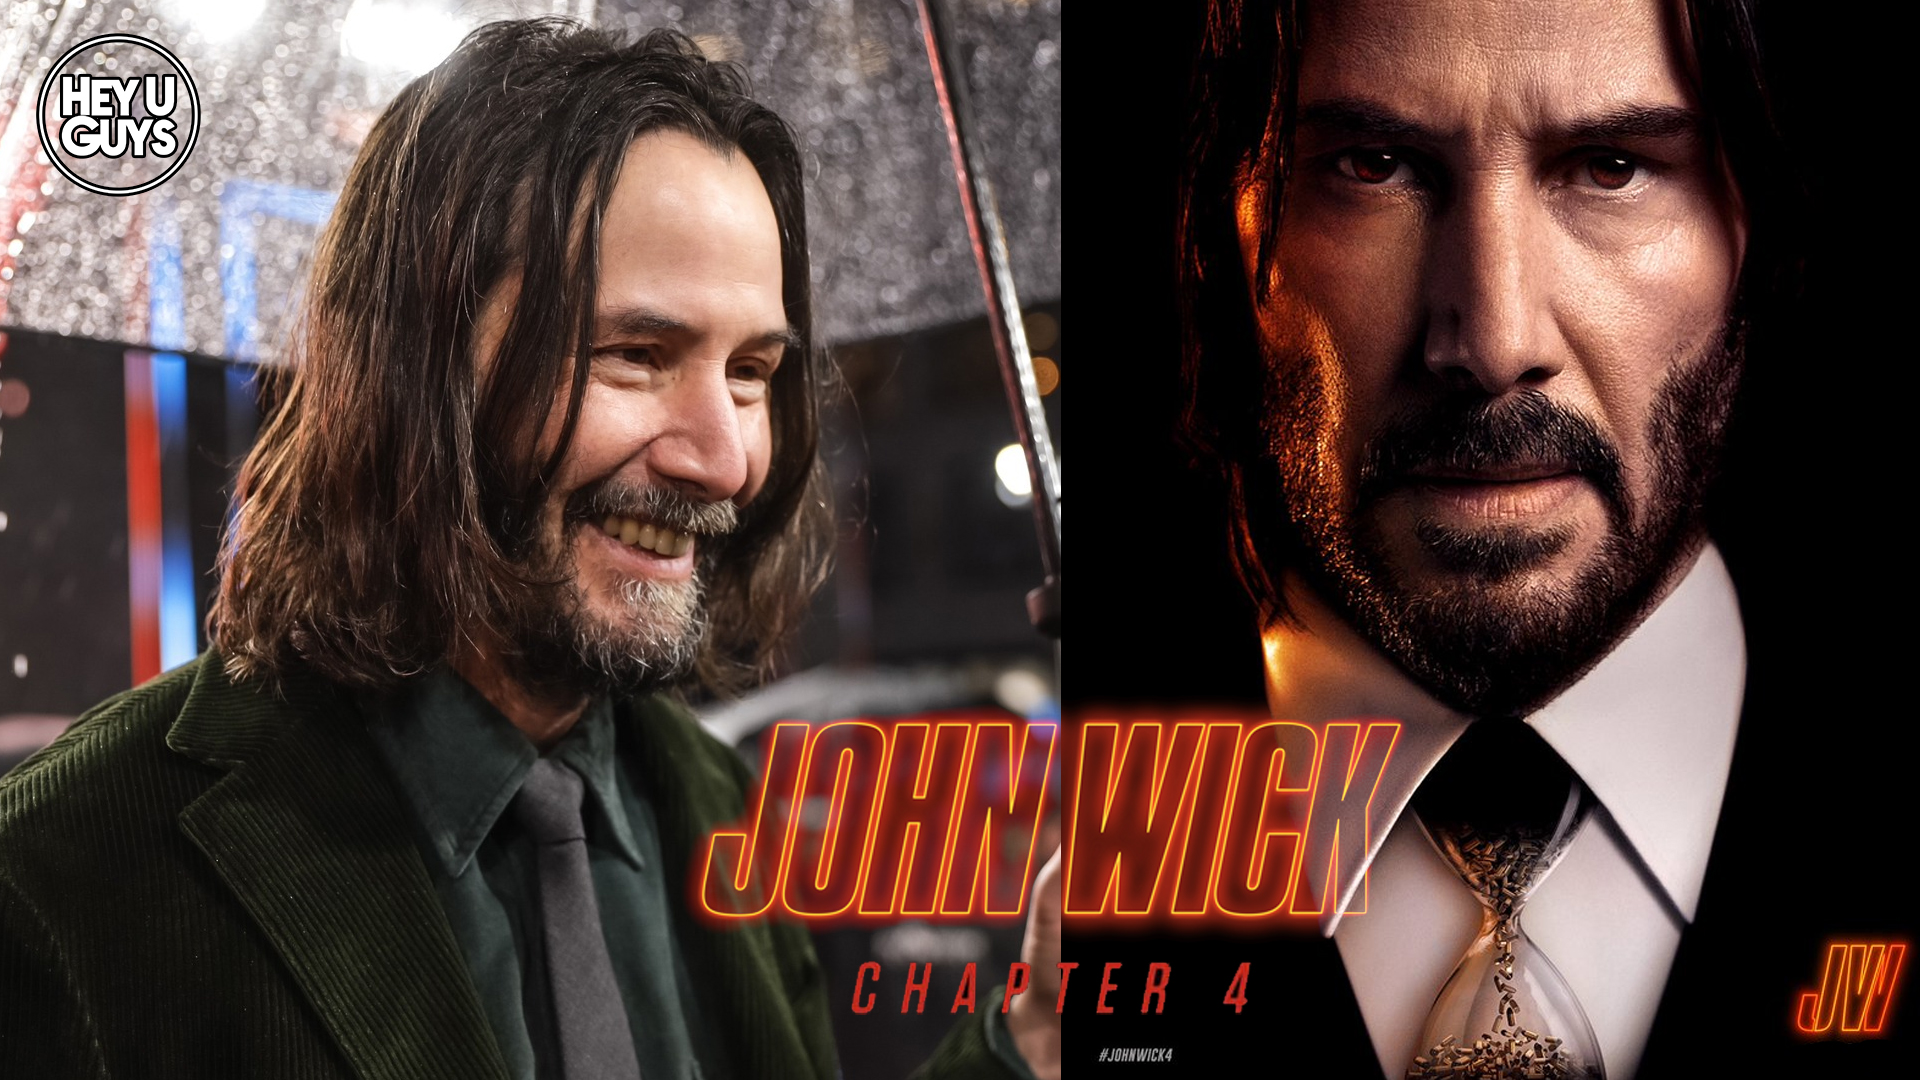 Exclusive: John Wick: Chapter 4 cast interviews with Keanu Reeves